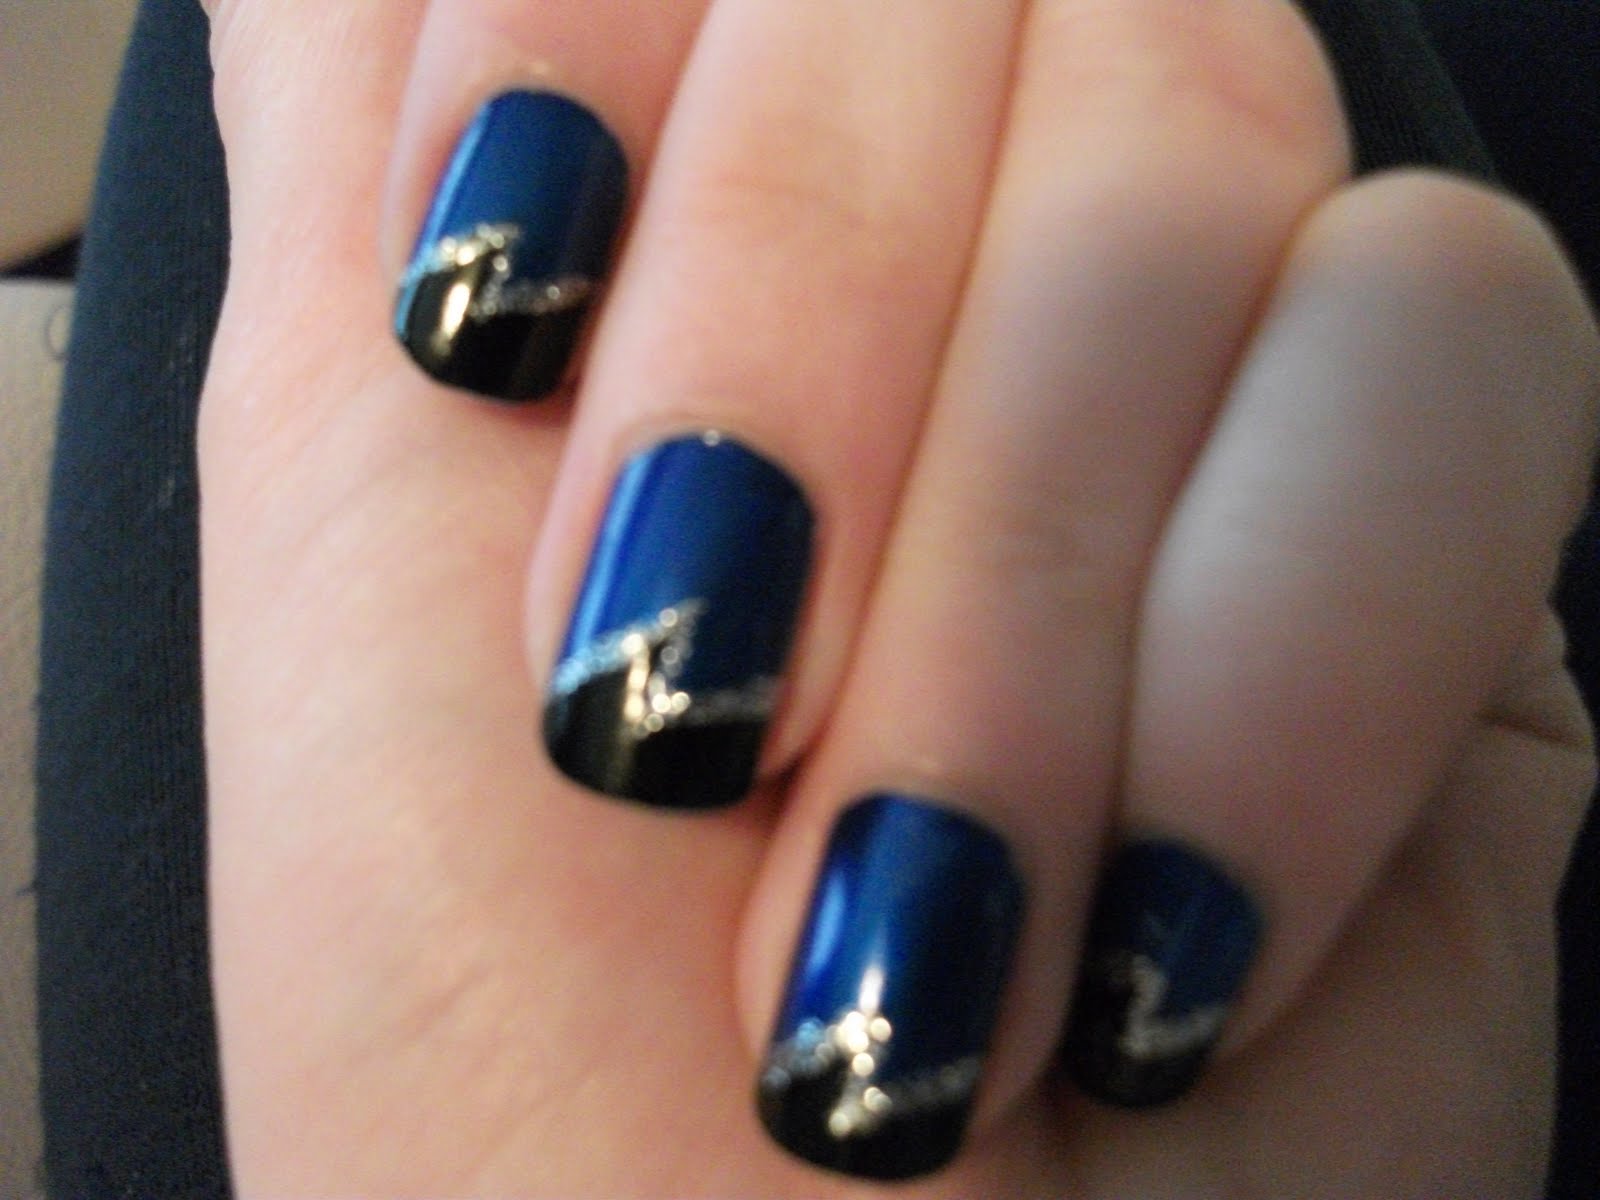 2. "Nail Art Designs with Lightning Bolts" - wide 8